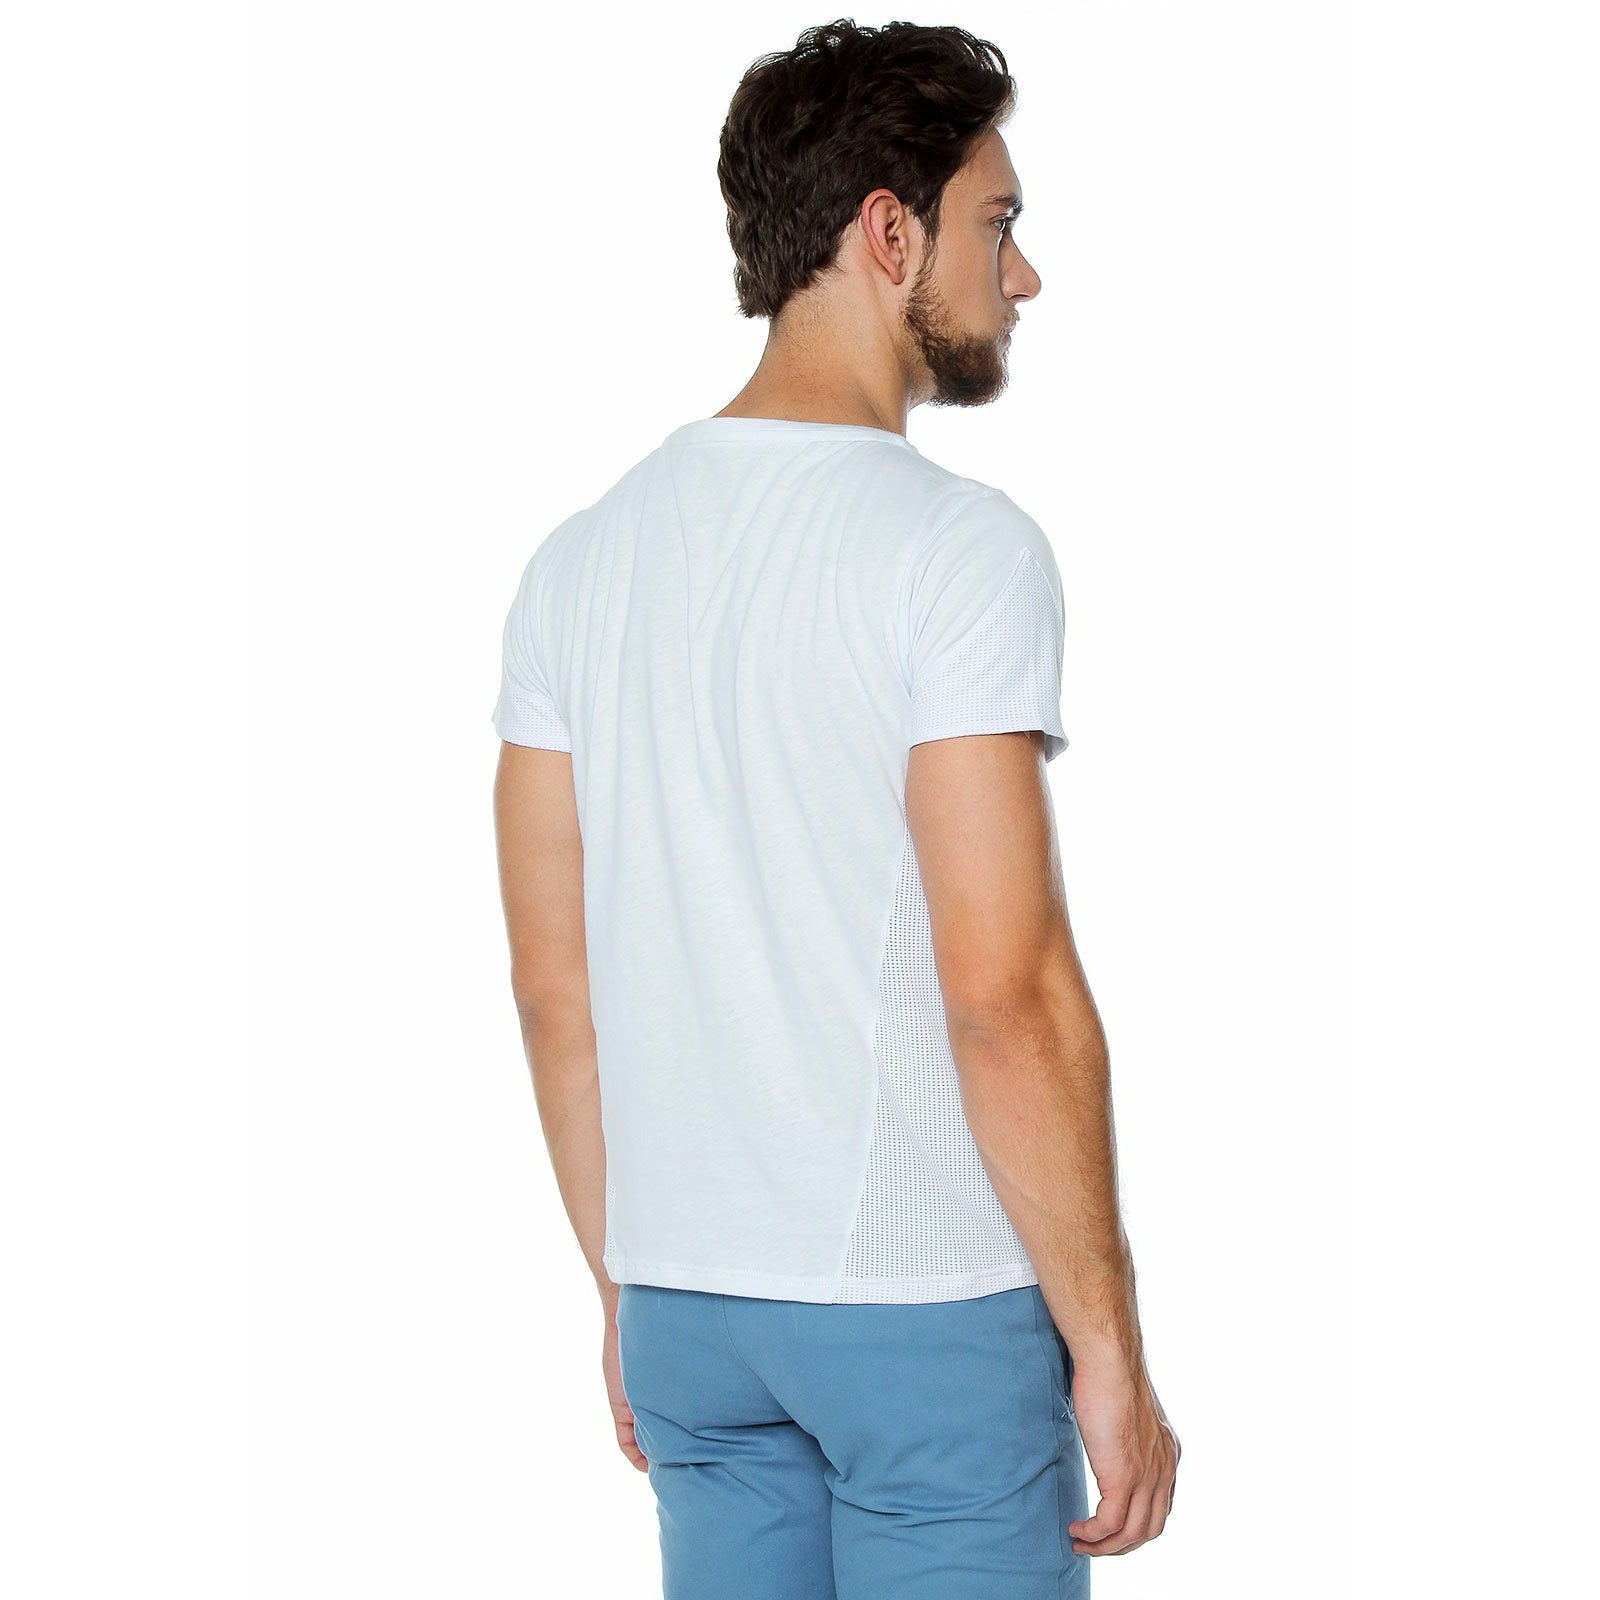 Camiseta deportiva / casual color blanco! Athleisure T-shirt in